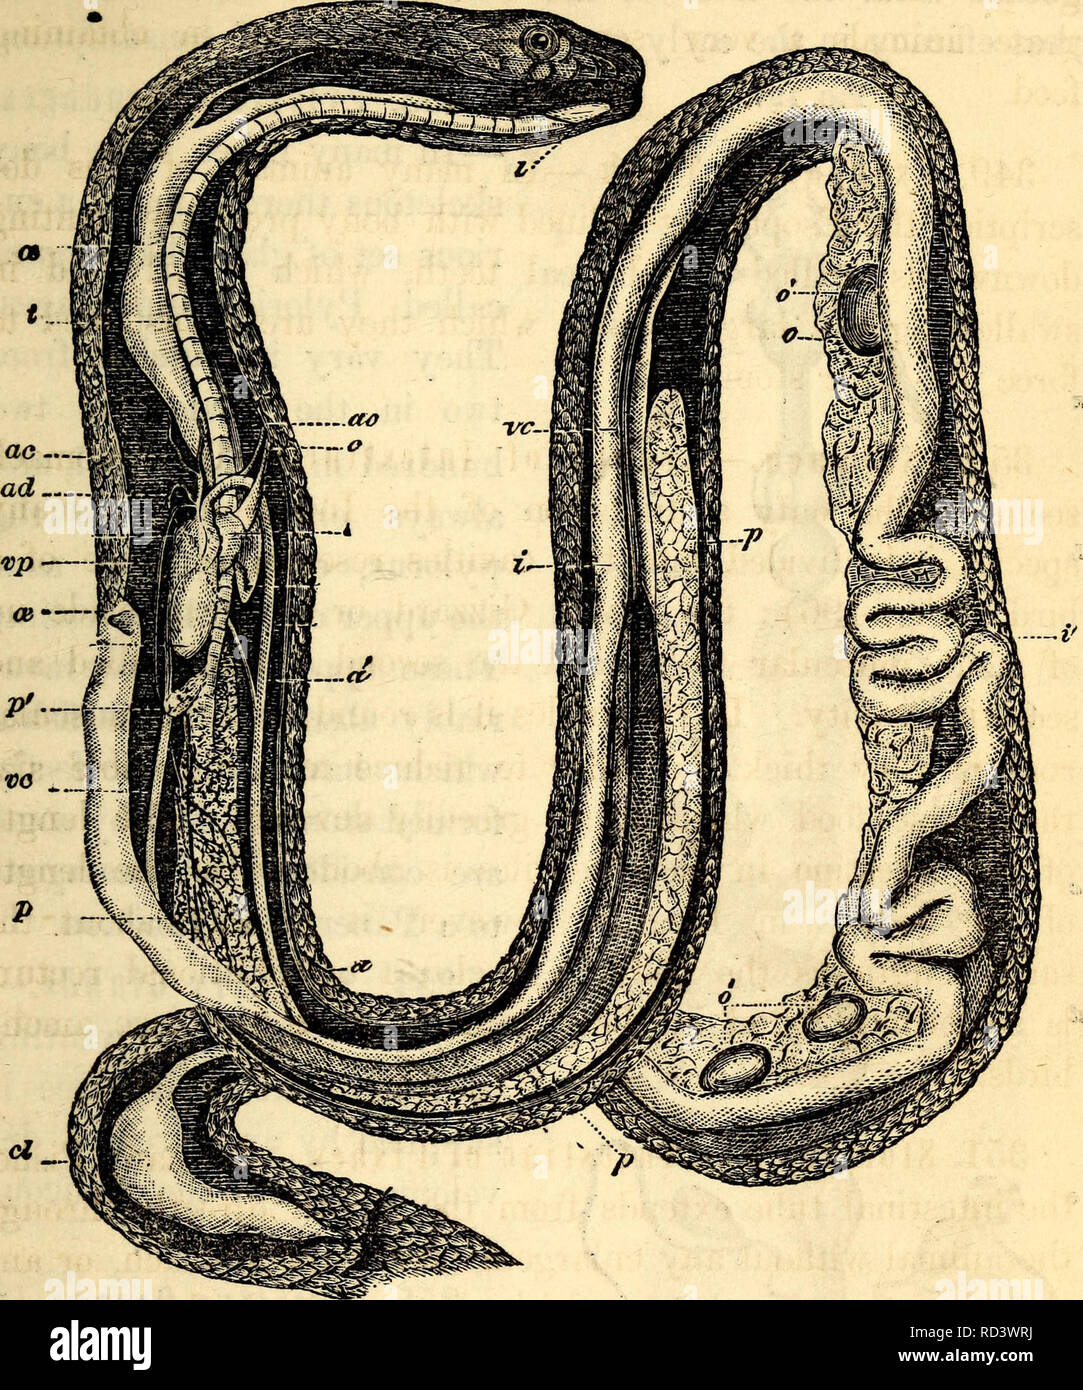 . Elementary anatomy and physiology : for colleges, academies, and other schools. Anatomy; Physiology. AND PHYSIOLOGY. 193 Fig. 196.. Anatomy of the Common Snake. I. Tongue, ce. Esophagus, i. Stomach. if. Small Intestine, cl. Cloaca. /. Liver, o. Ovary, o'. Eggs. t. Trachea, p. p Lungs, vt. Ventricle, e. e'. Auricles, a. ad. af. Aorta, ae. Carotid Arteries, v. vc. Vena? Cavte. Vp. Pulmonary Vein. inversions into several divisions with valve-like appendages between them. 352. Liver.—Fishes have usually a large soft Liver com- pletely saturated with an oil. Its form is various, but is 352. Spea Stock Photo